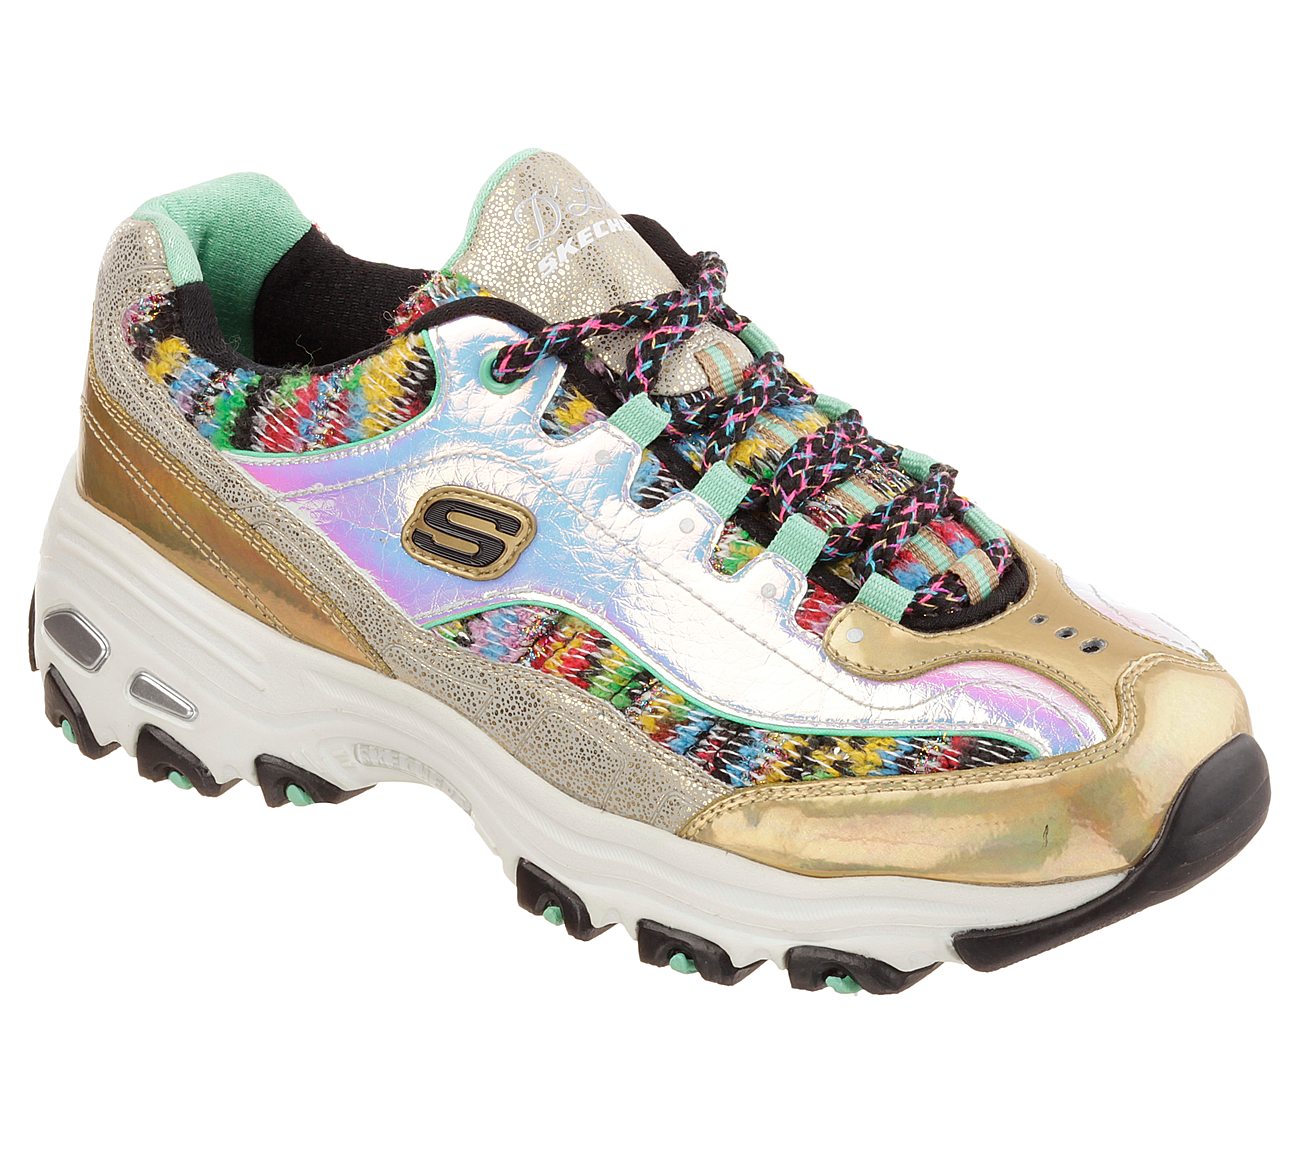 skechers gold shoes